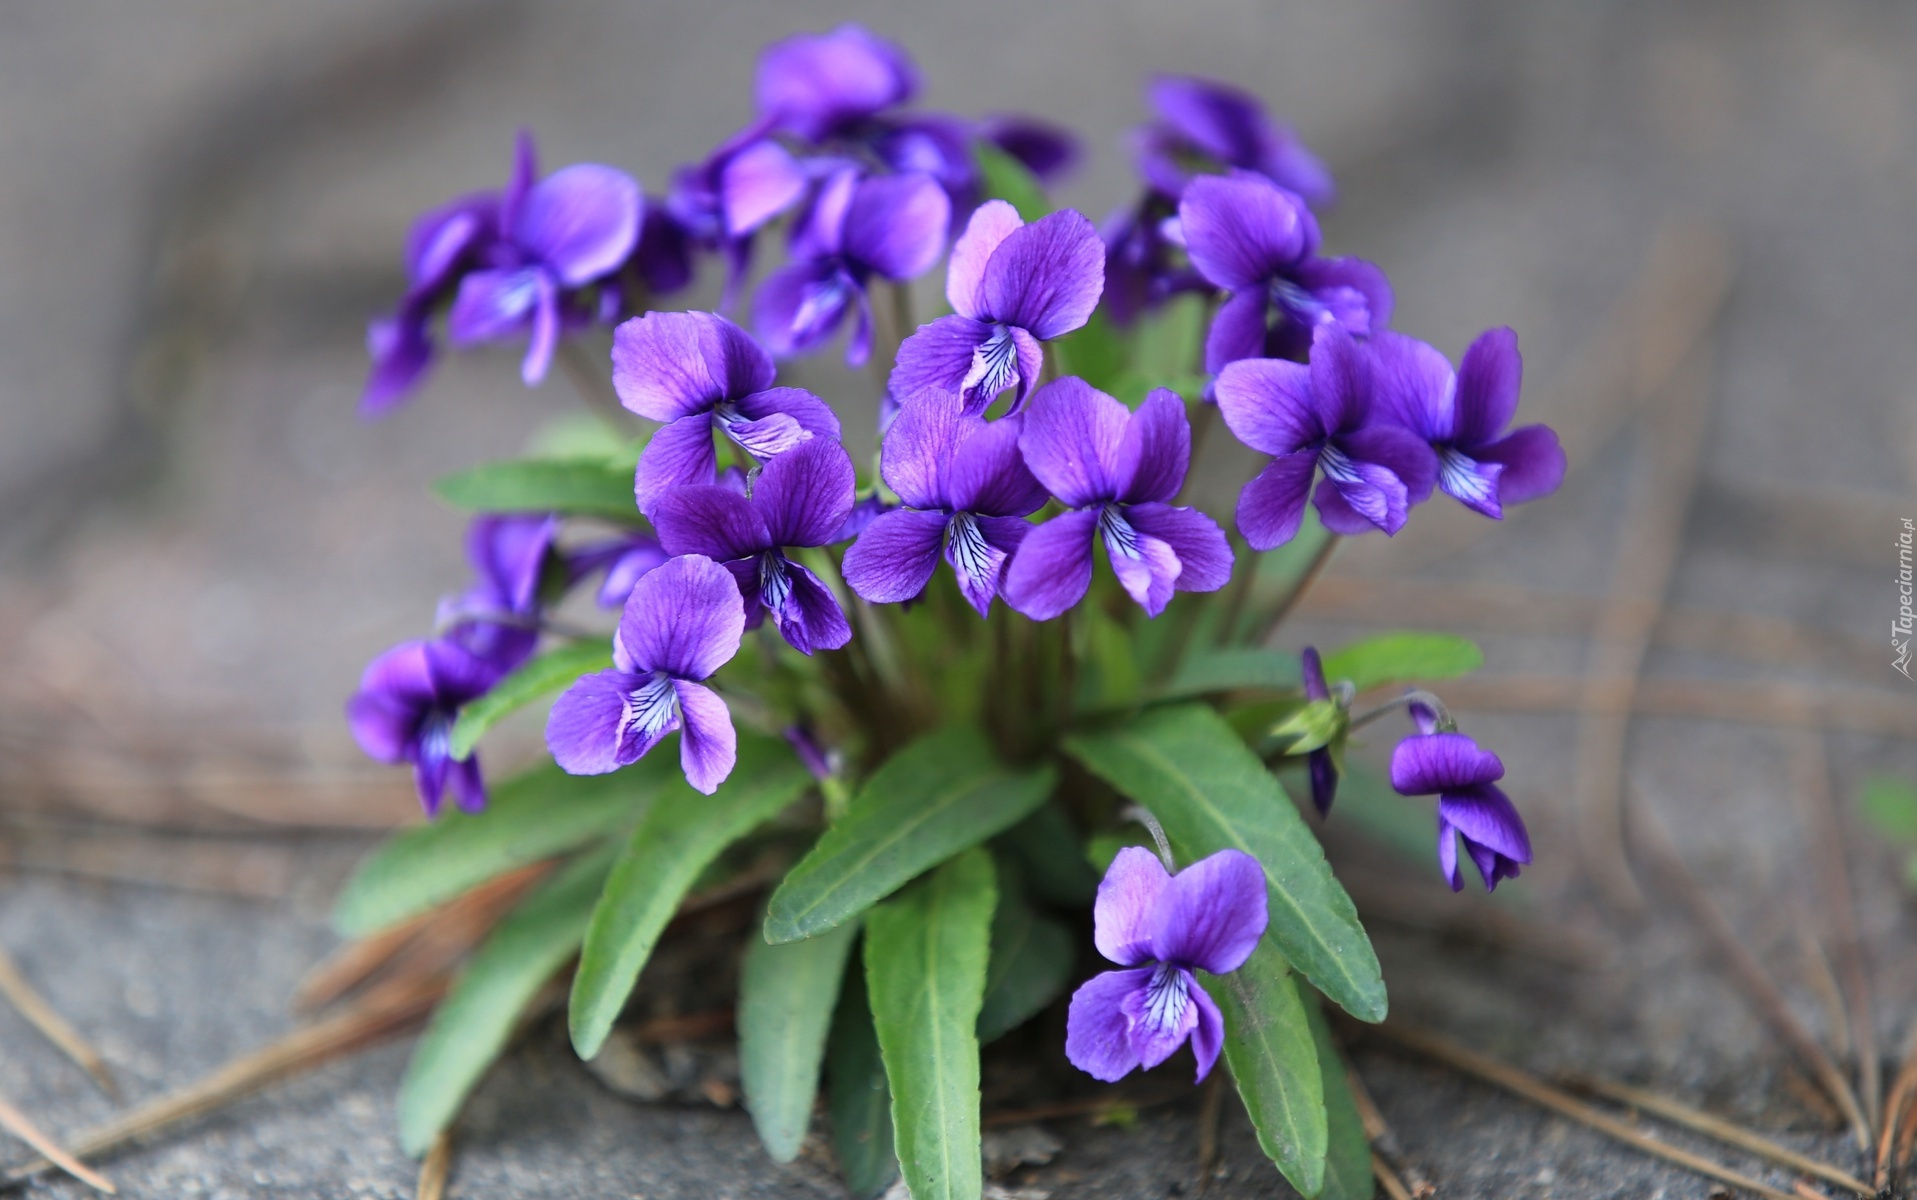 February Birth Flower: The Violet